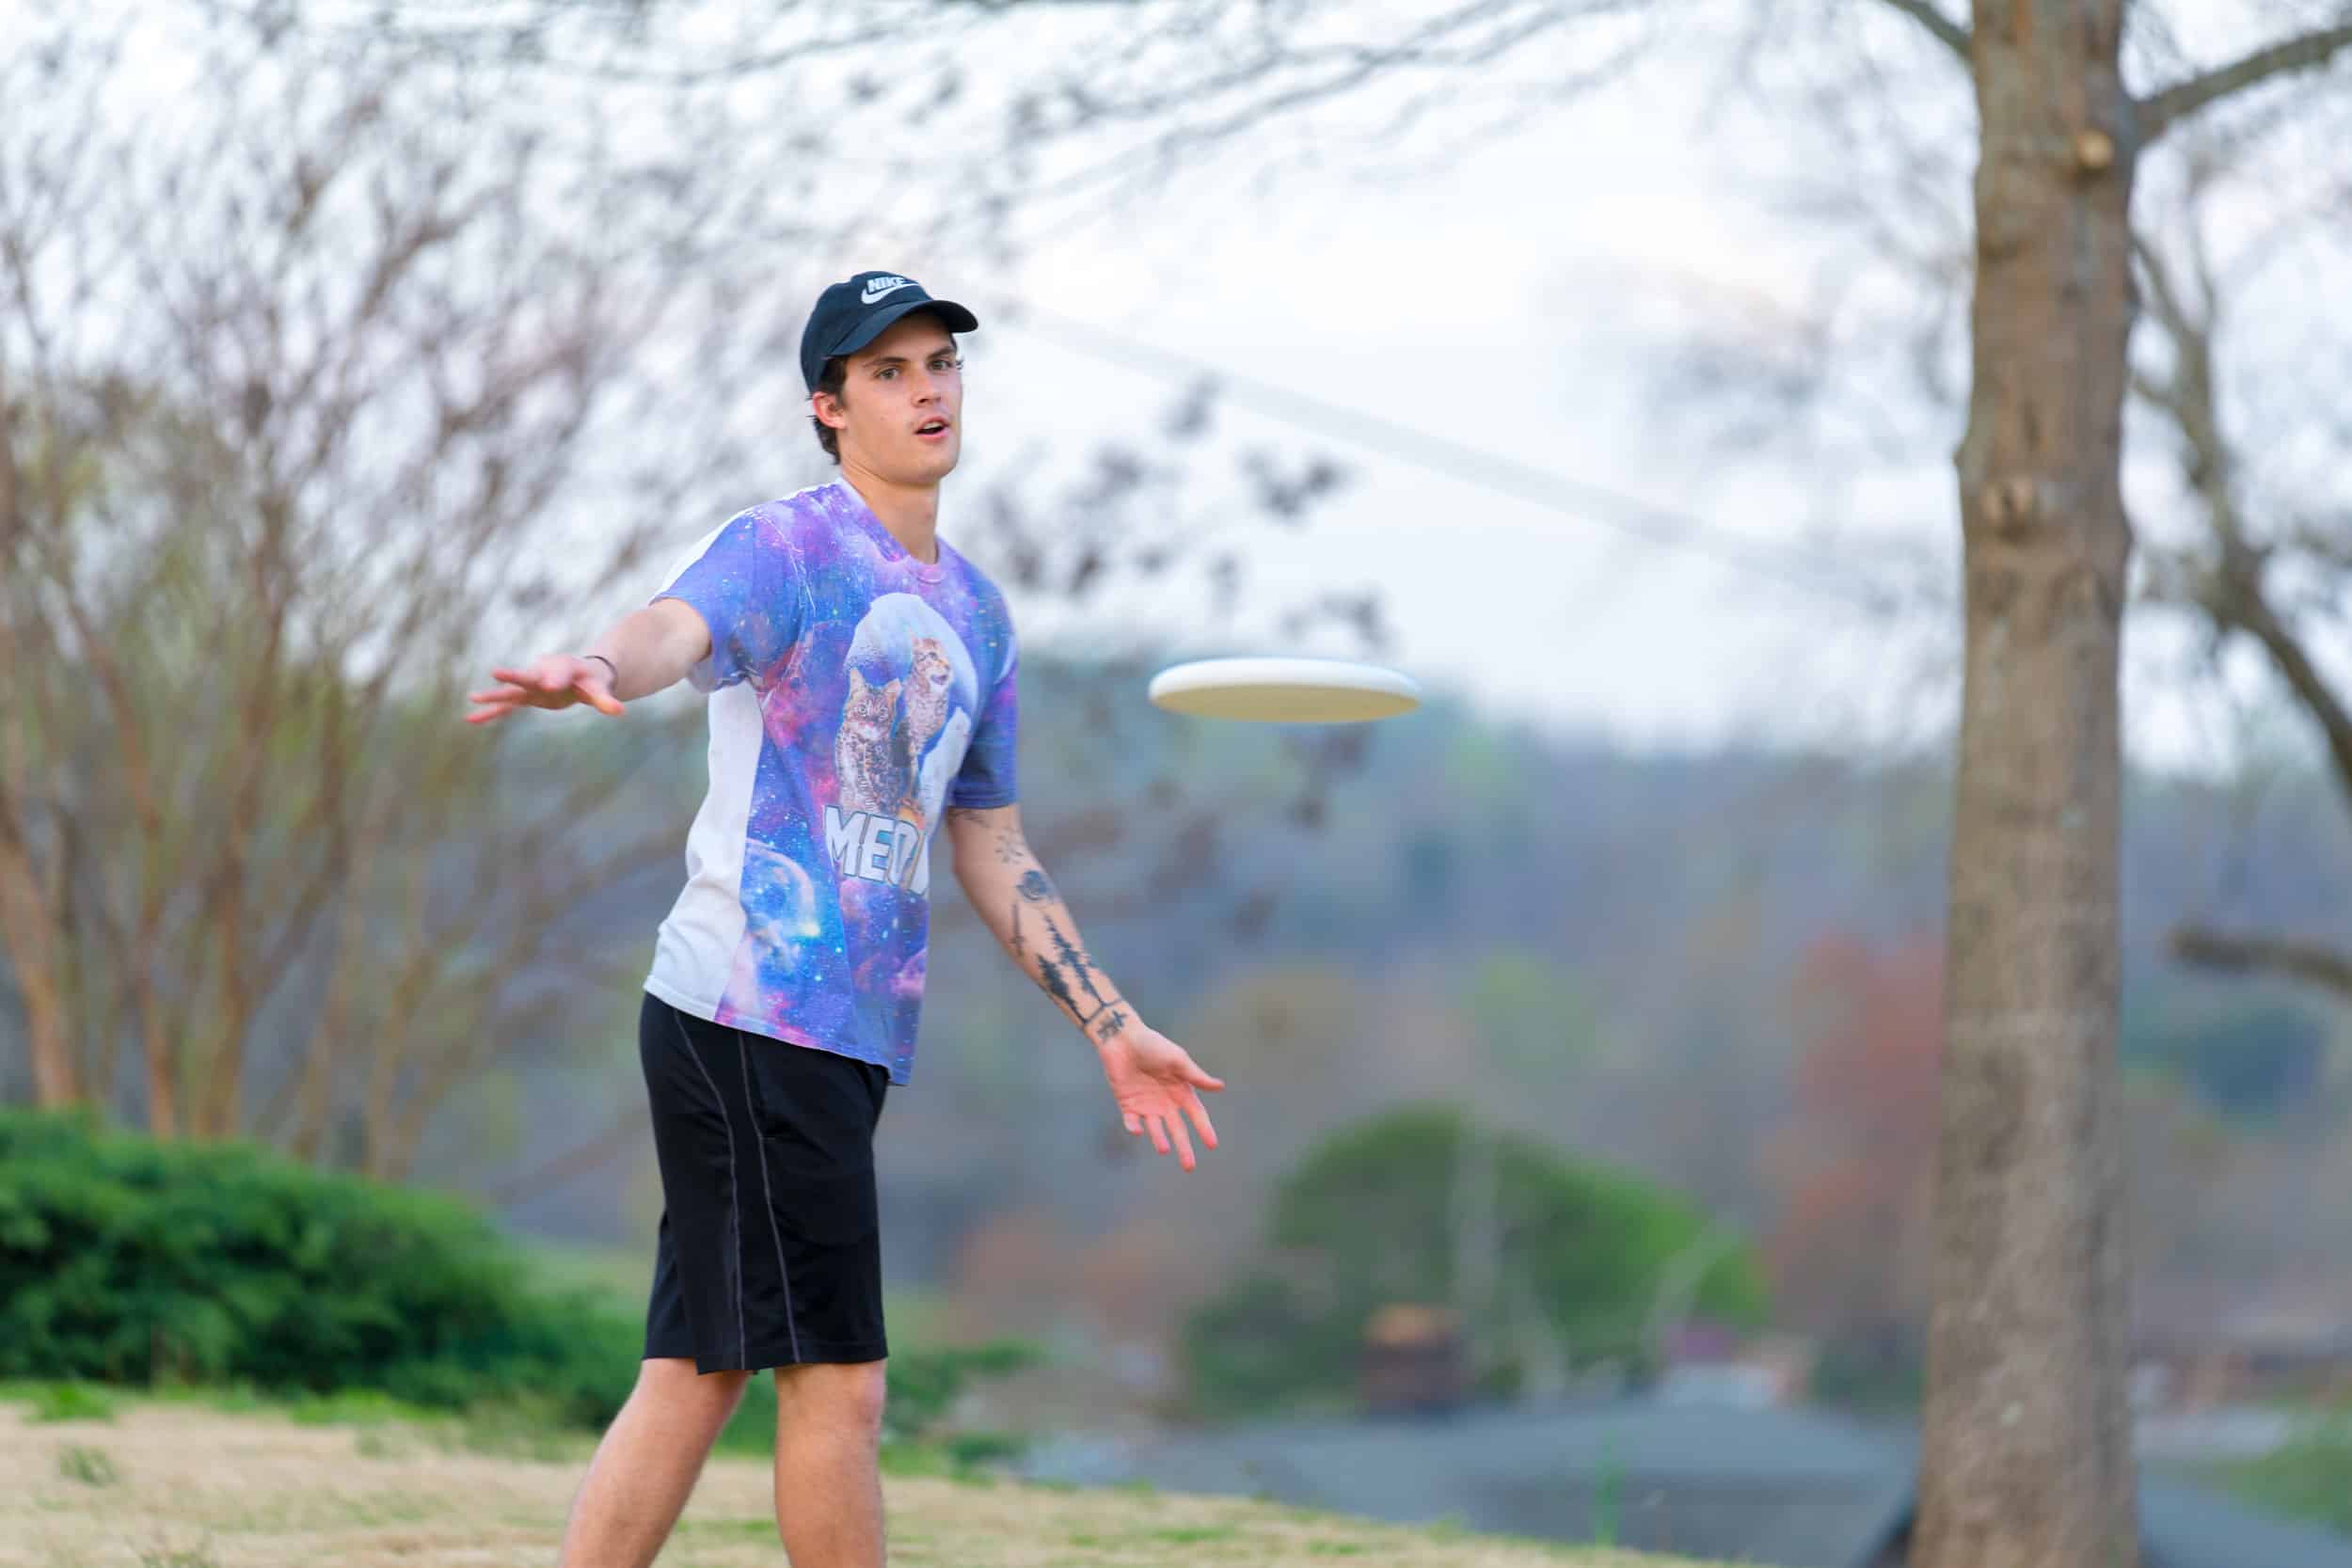 Caleb Kohns returns fire in a game of Frisbee.